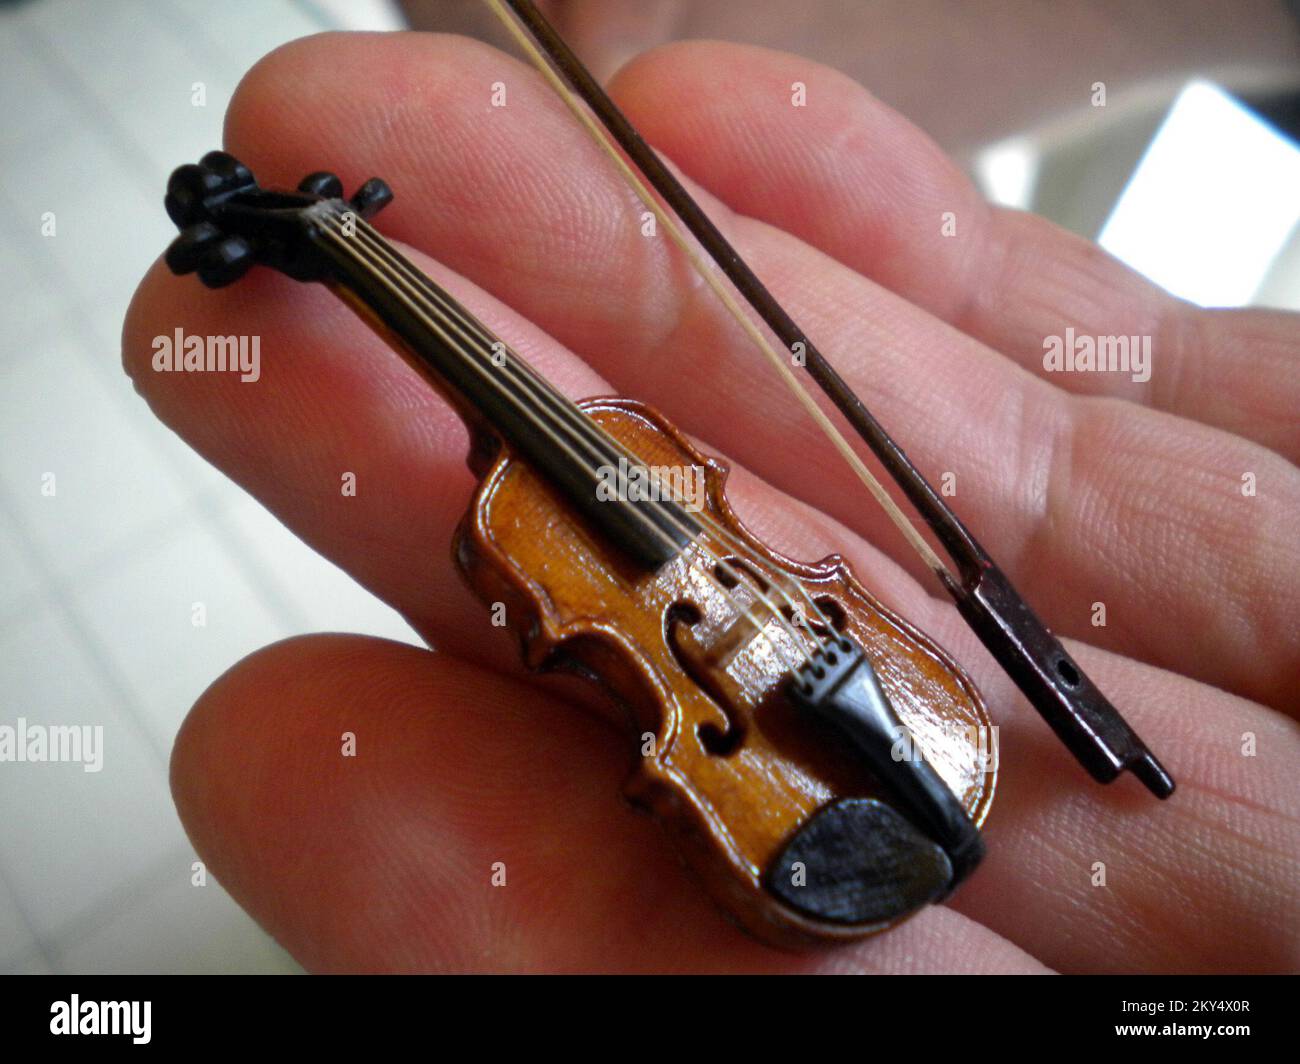 Inventor Vladimir from Borovo has made the smallest violin in the world. To create violin he cikakatimber from Bali and string made from Indian horsehair from Bolivia. Its length